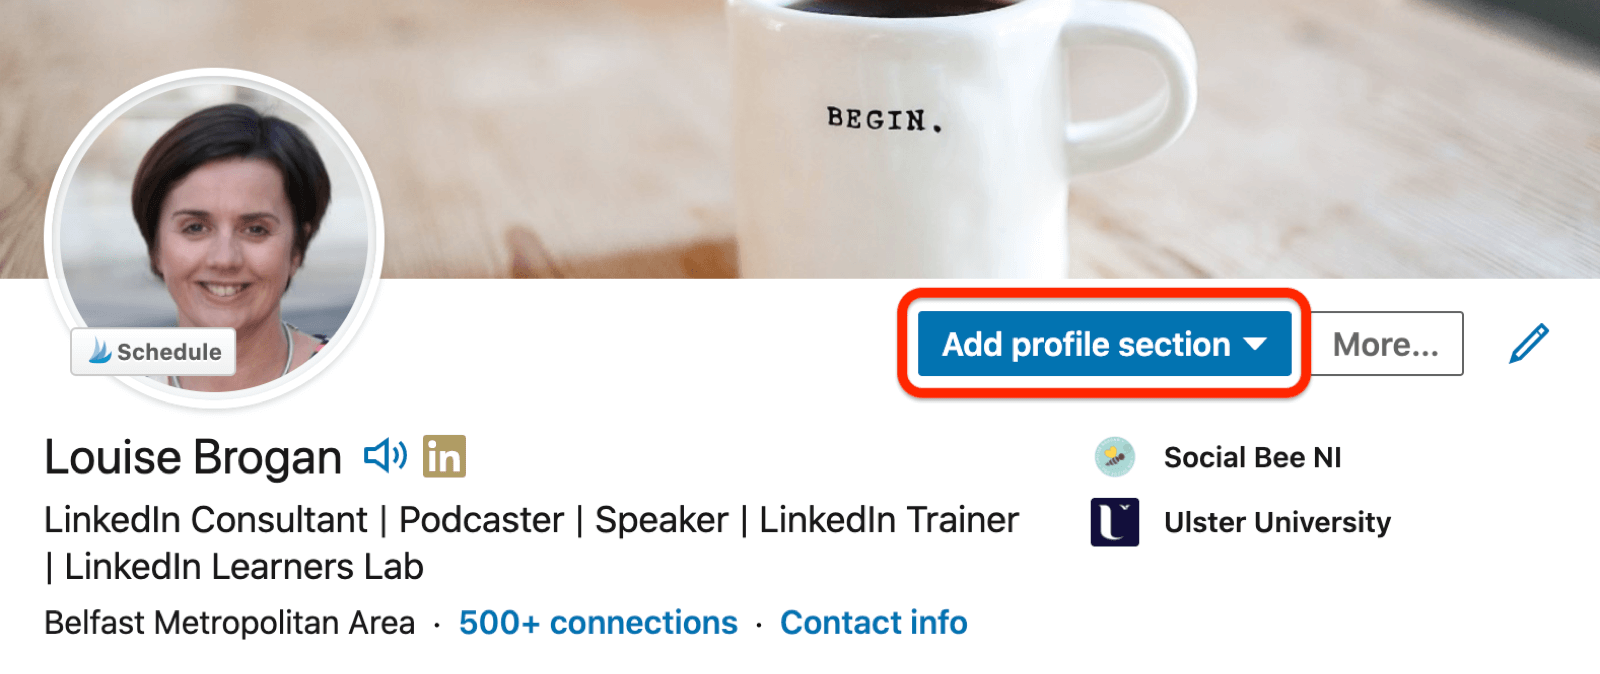 sample linkedin profile with the ad profile section button highlighted